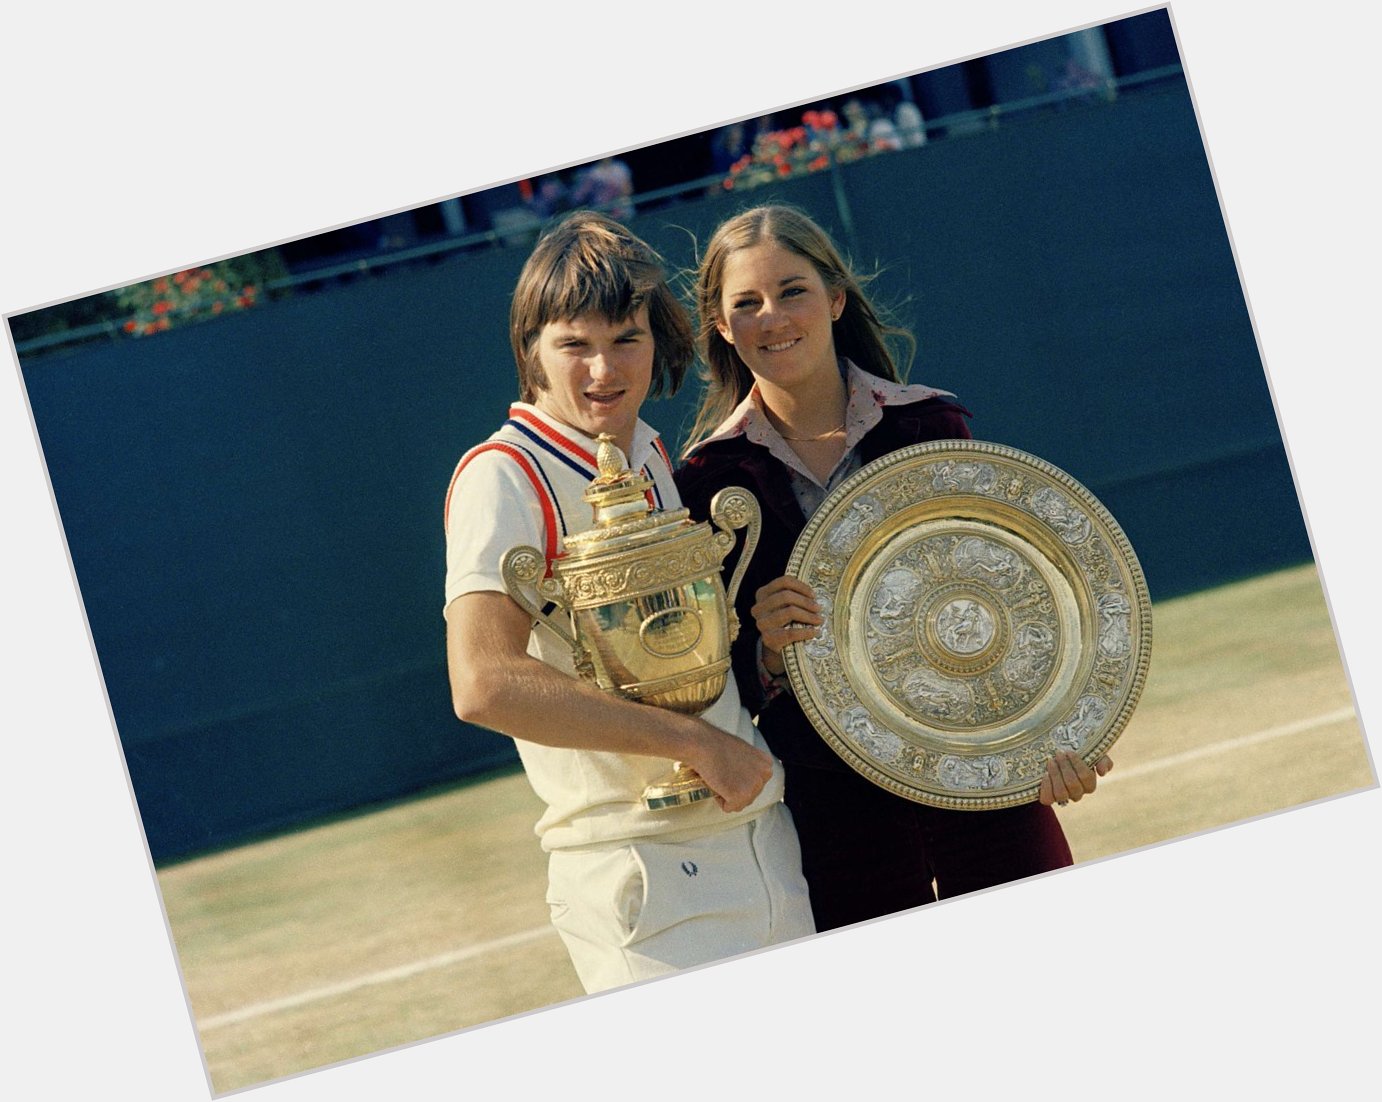 1,535 matches 8 Grandlsams Happy 6  5  birthday Jimmy Connors!  